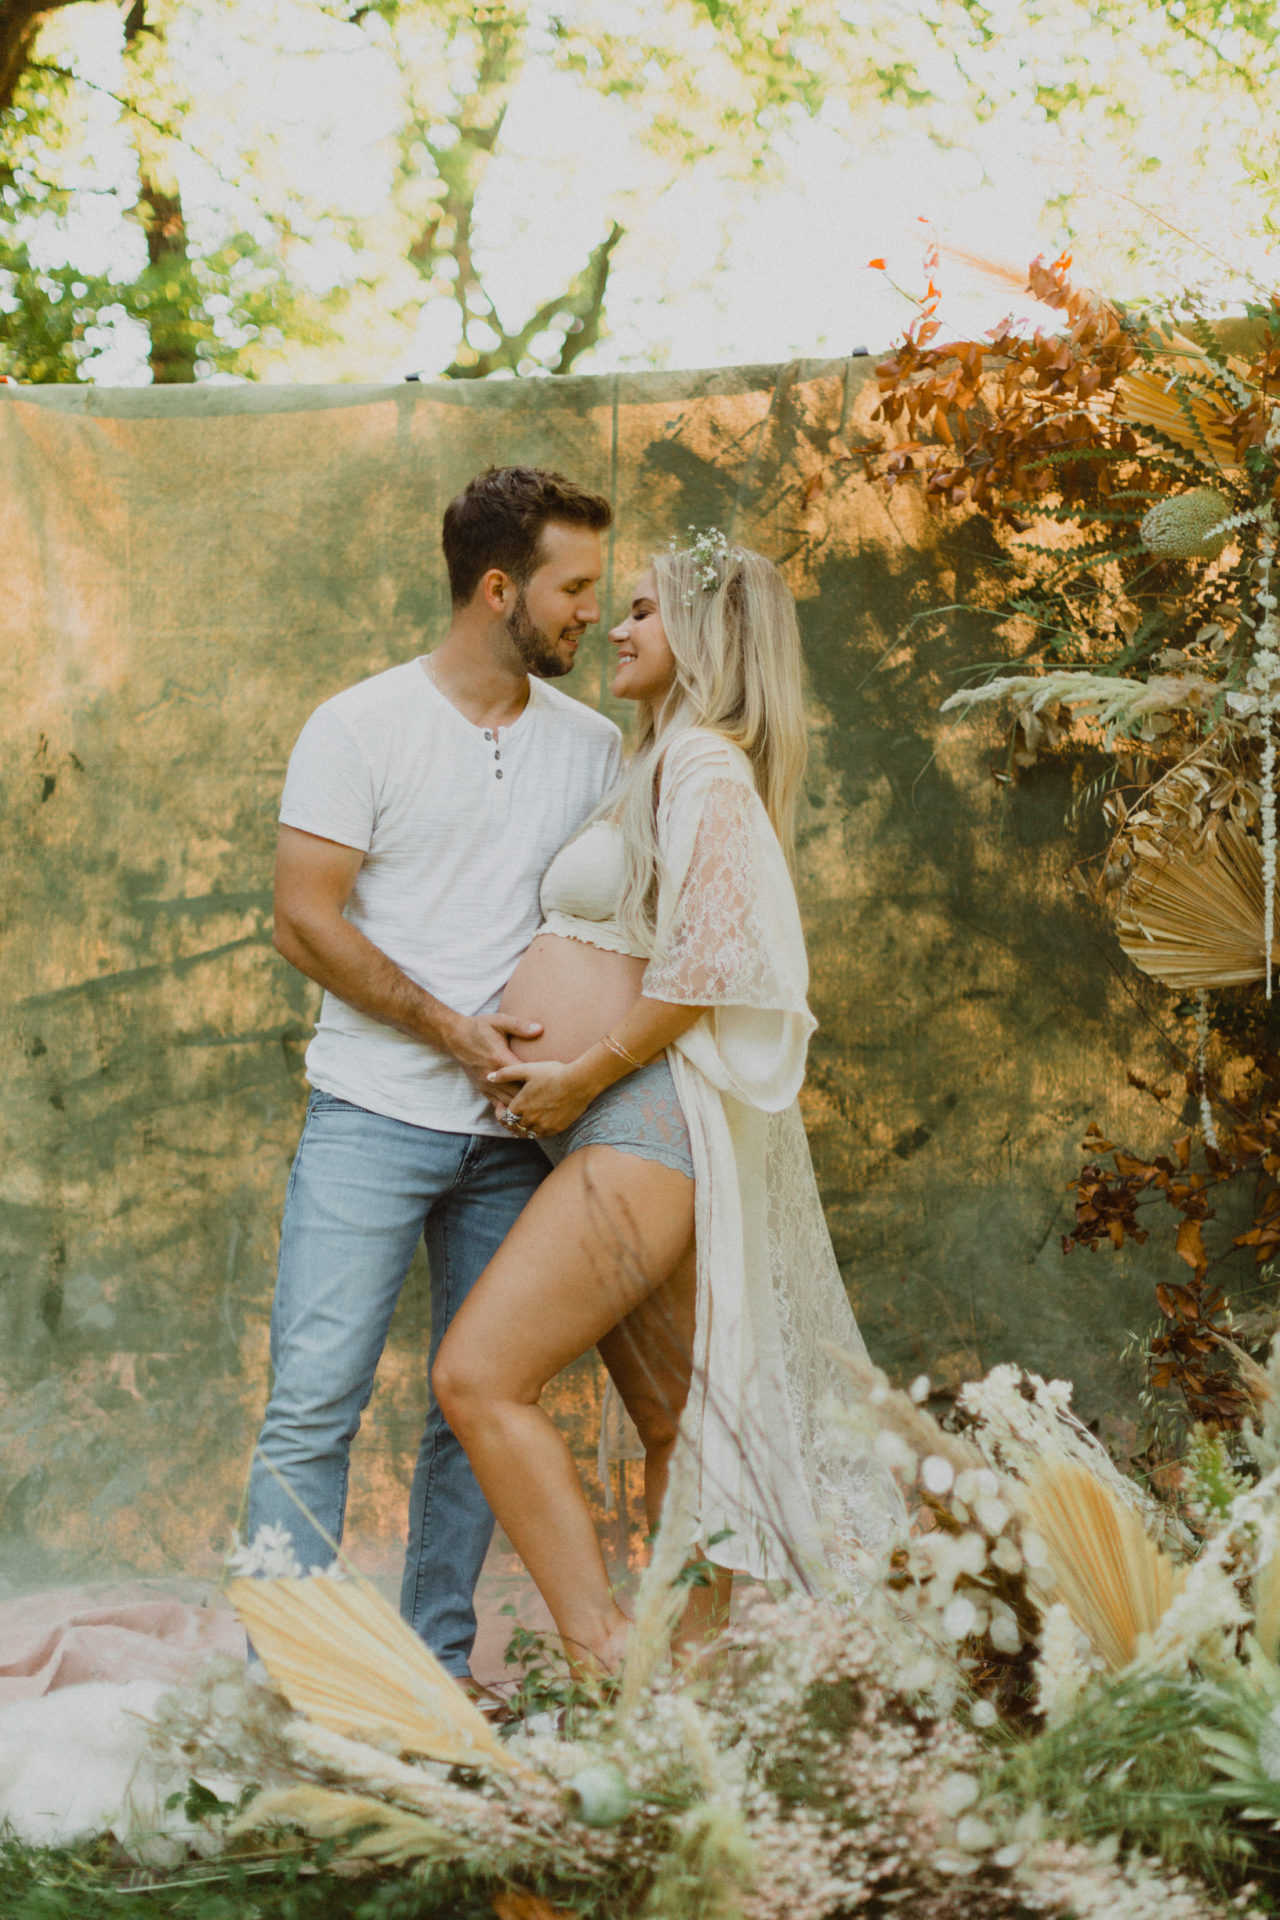 his and hers boudoir outdoor maternity photoshoot with wildflowers